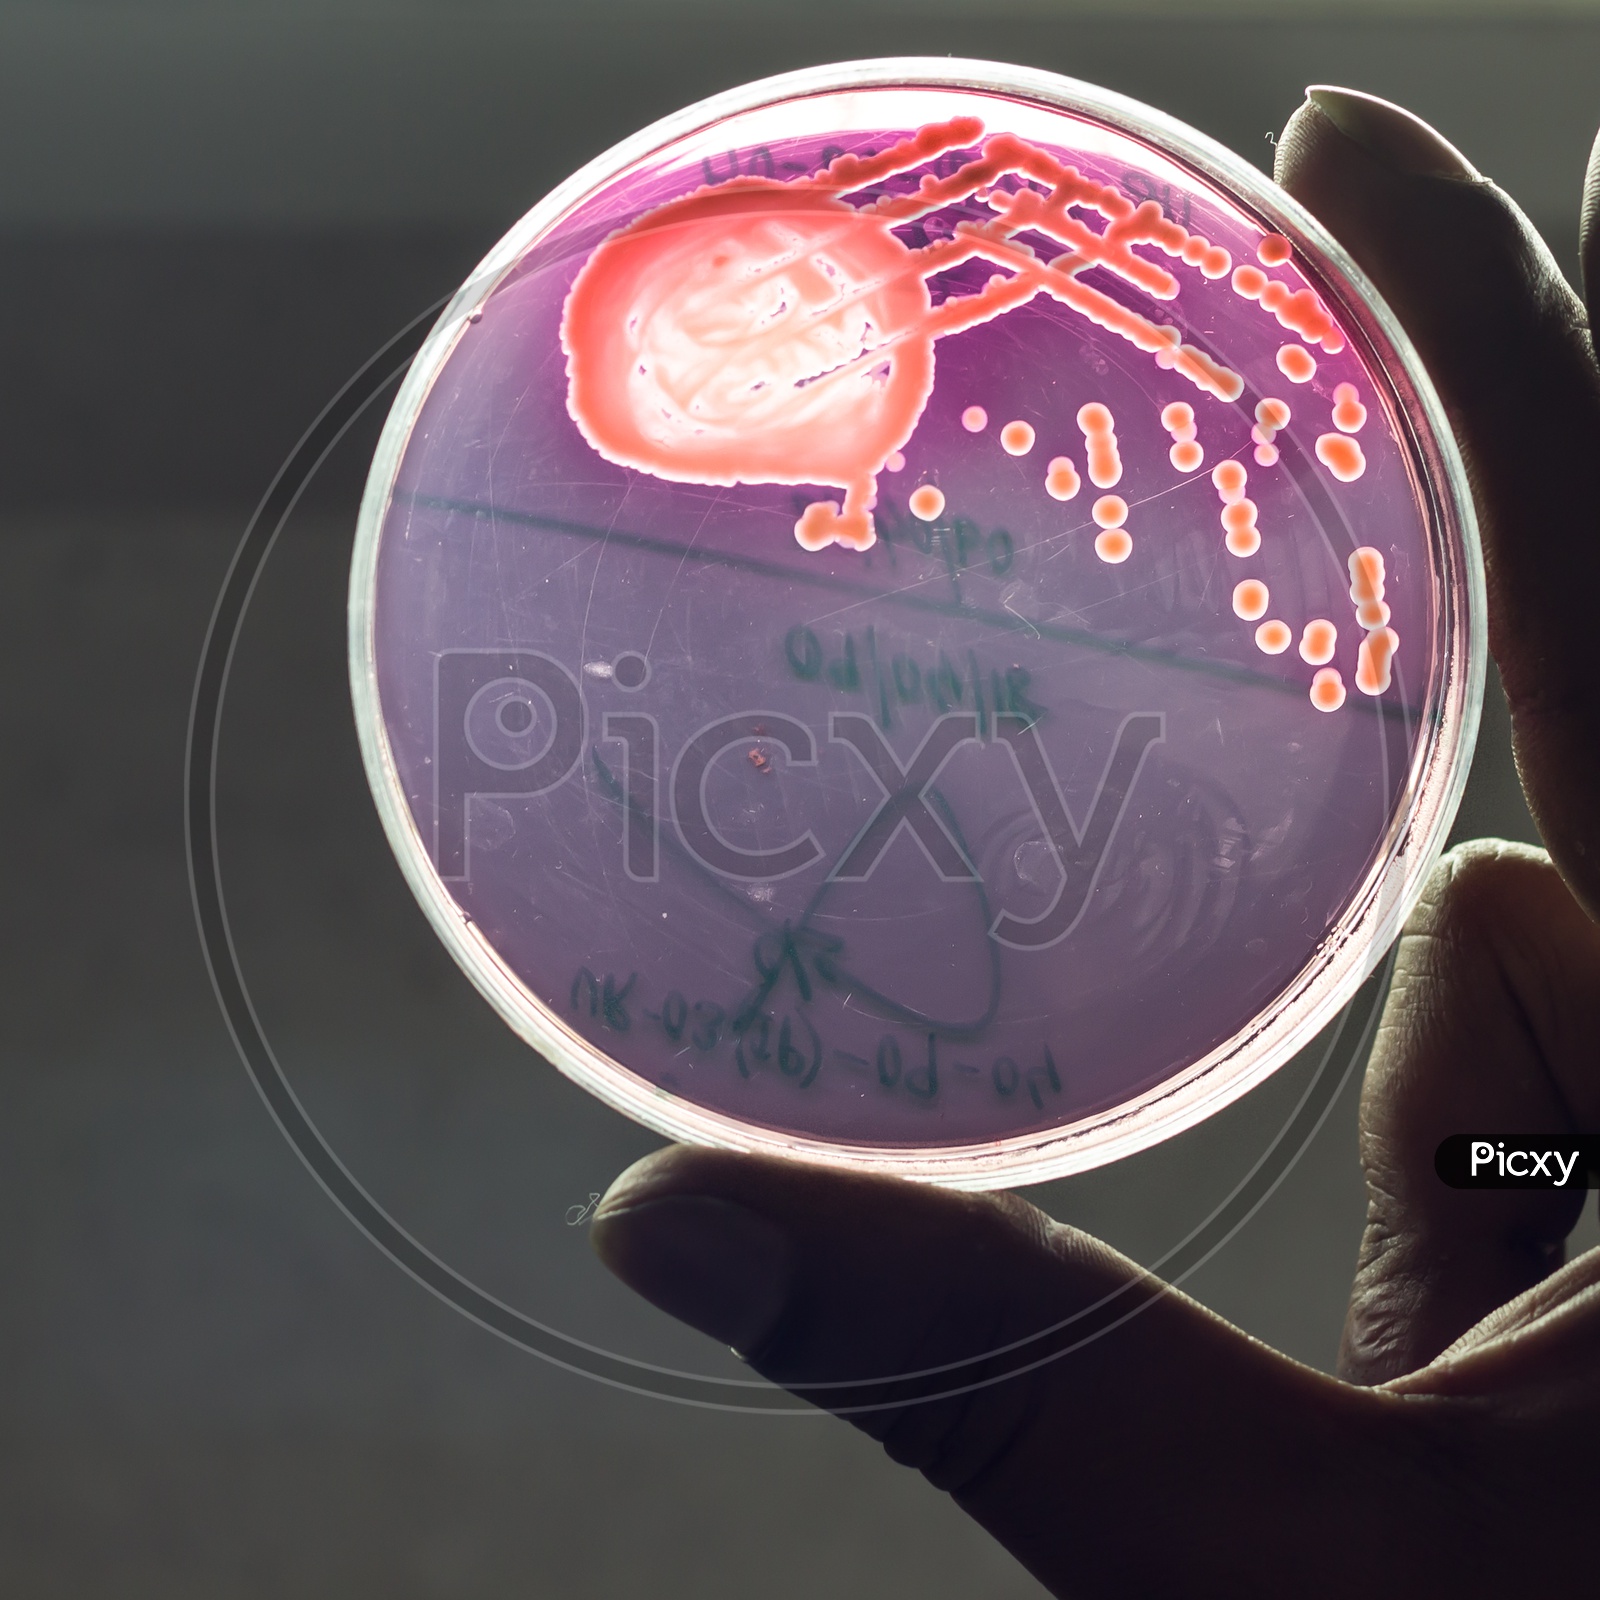 Bacterial Culture Plate Showing Growth Of Bacterial Colony In Mac Conkey Blood Agar Held By Hand